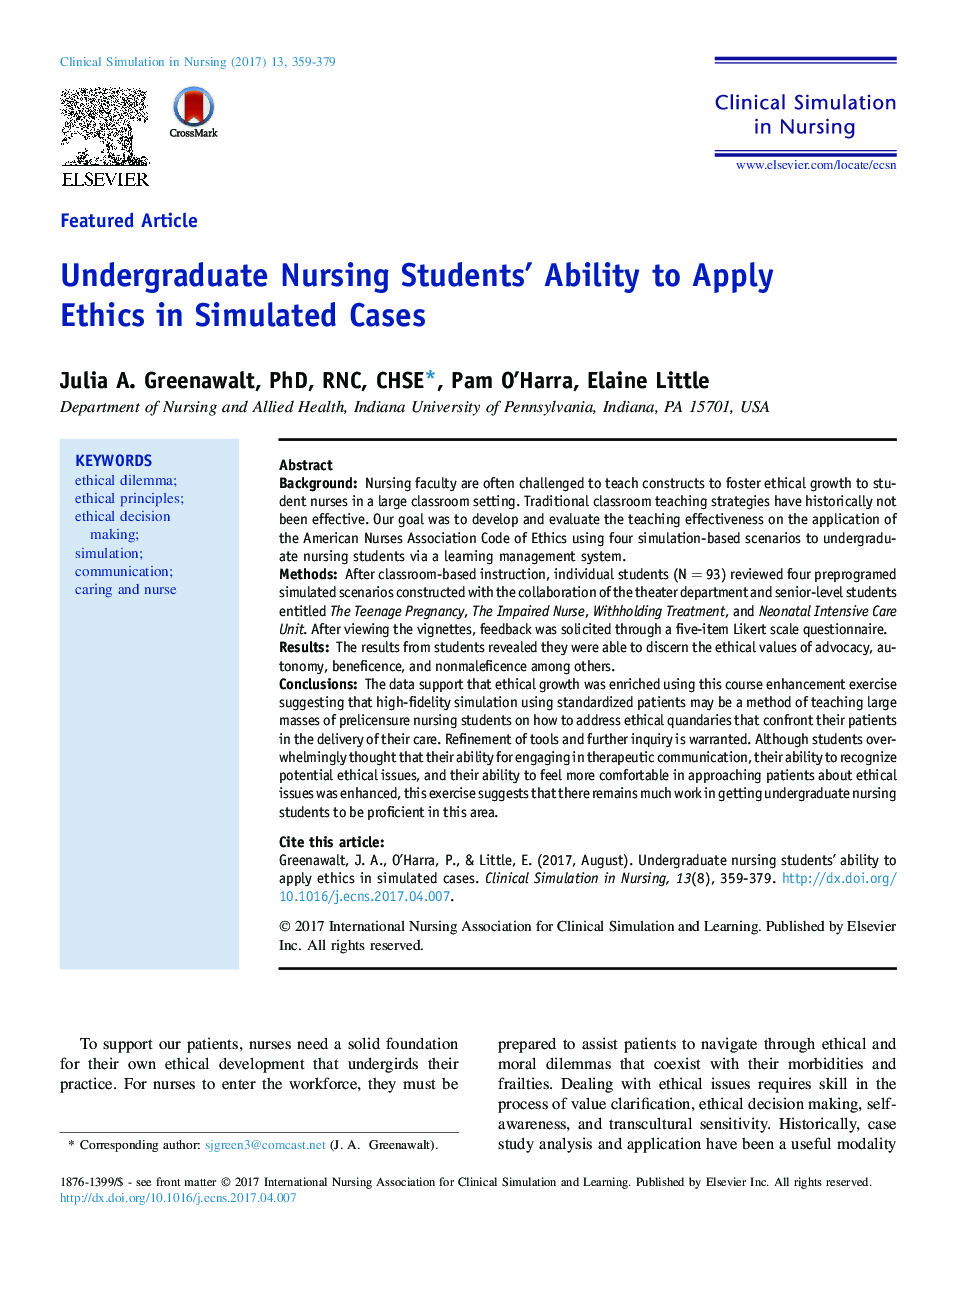 Undergraduate Nursing Students' Ability to Apply Ethics in Simulated Cases